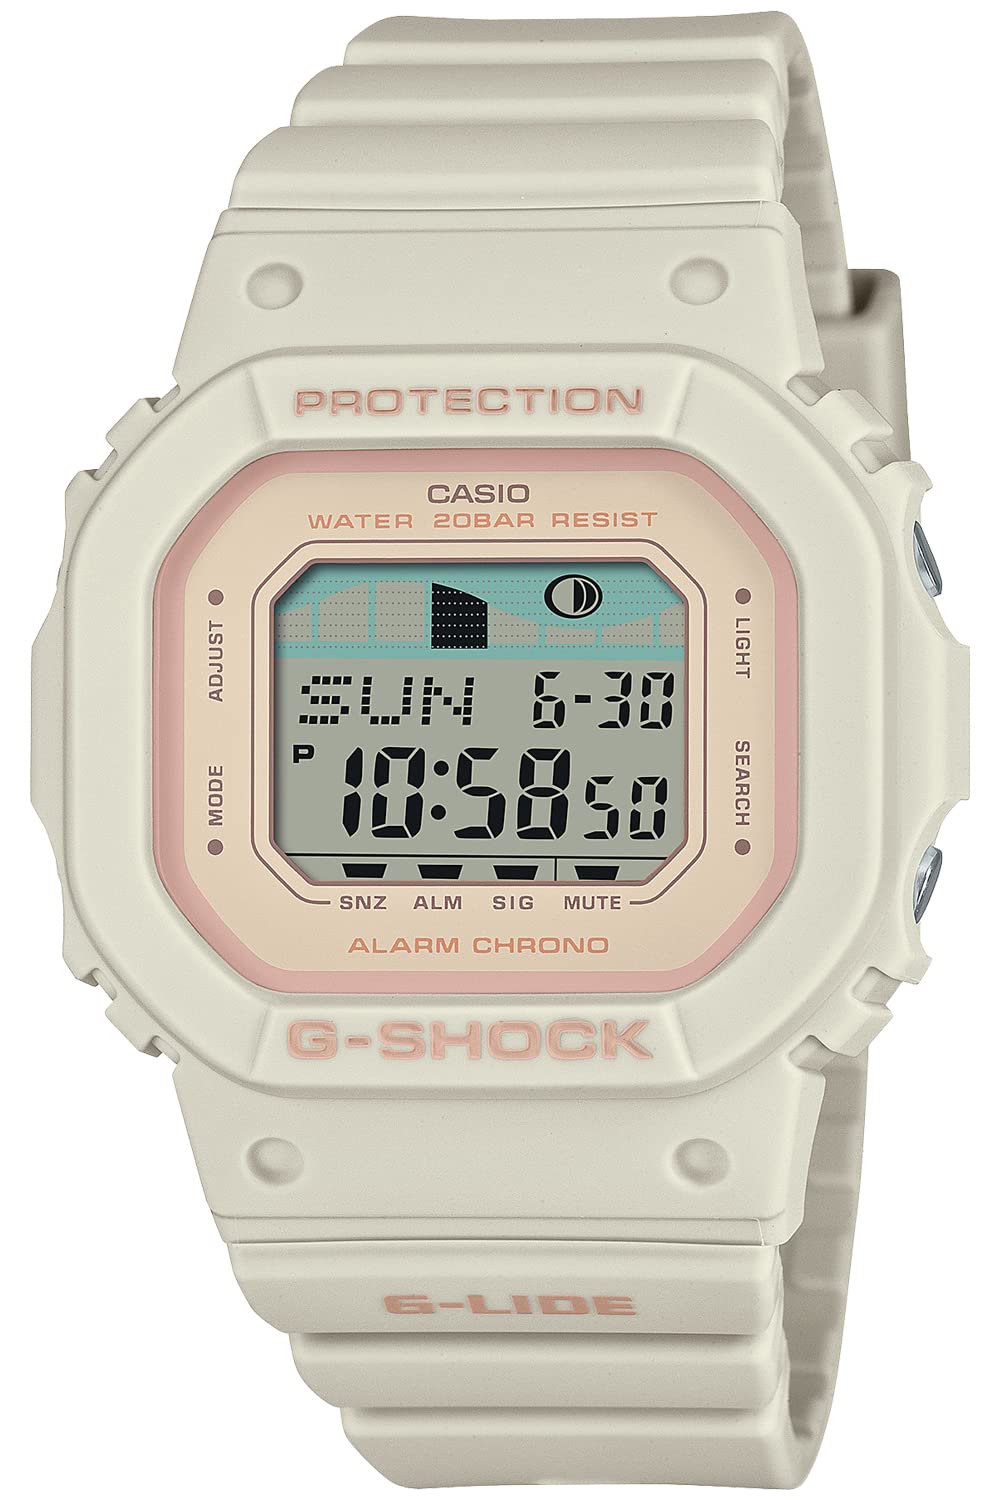 Casio GLX-S5600-7JF [G-Shock Sportsline G-LIDE Compact and Thin Model] Women's Watch Japan Import April 2023 Model